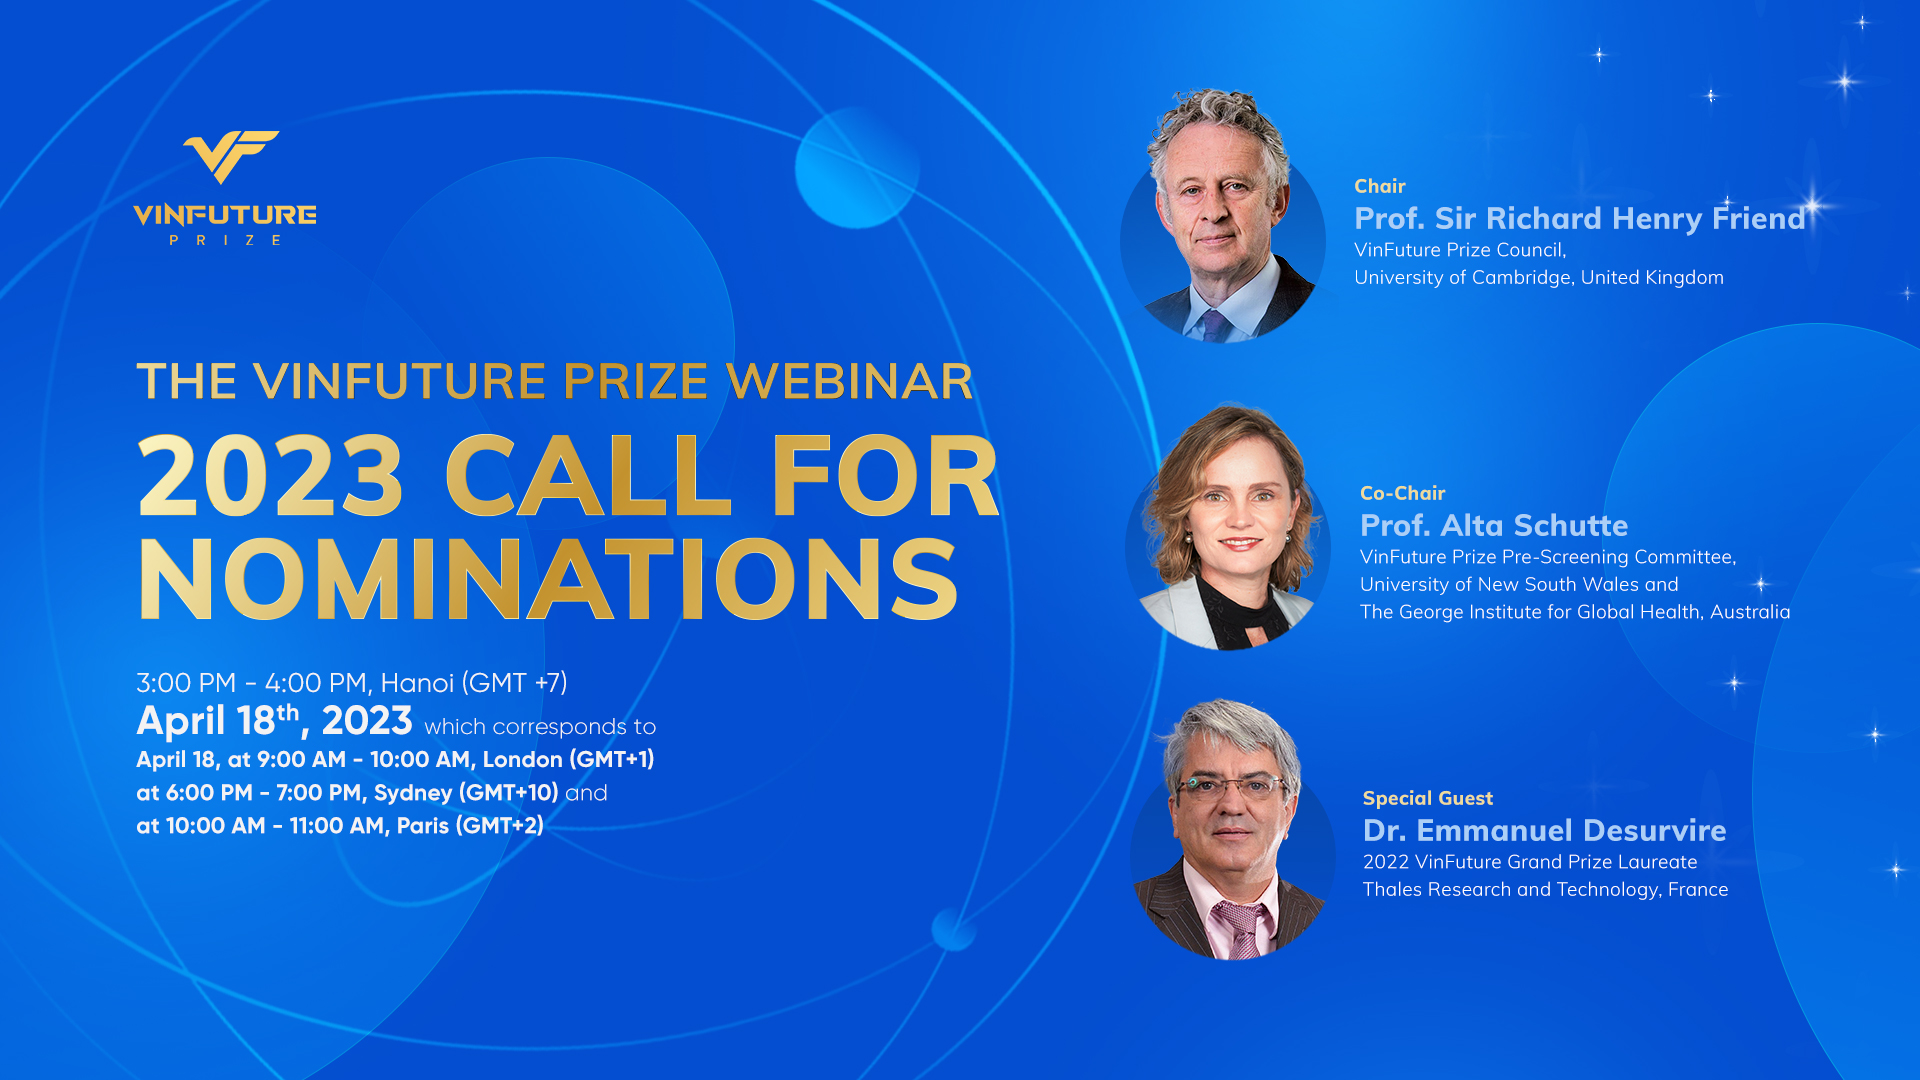 The Final ‘Call for Nominations’ Webinar of 2023